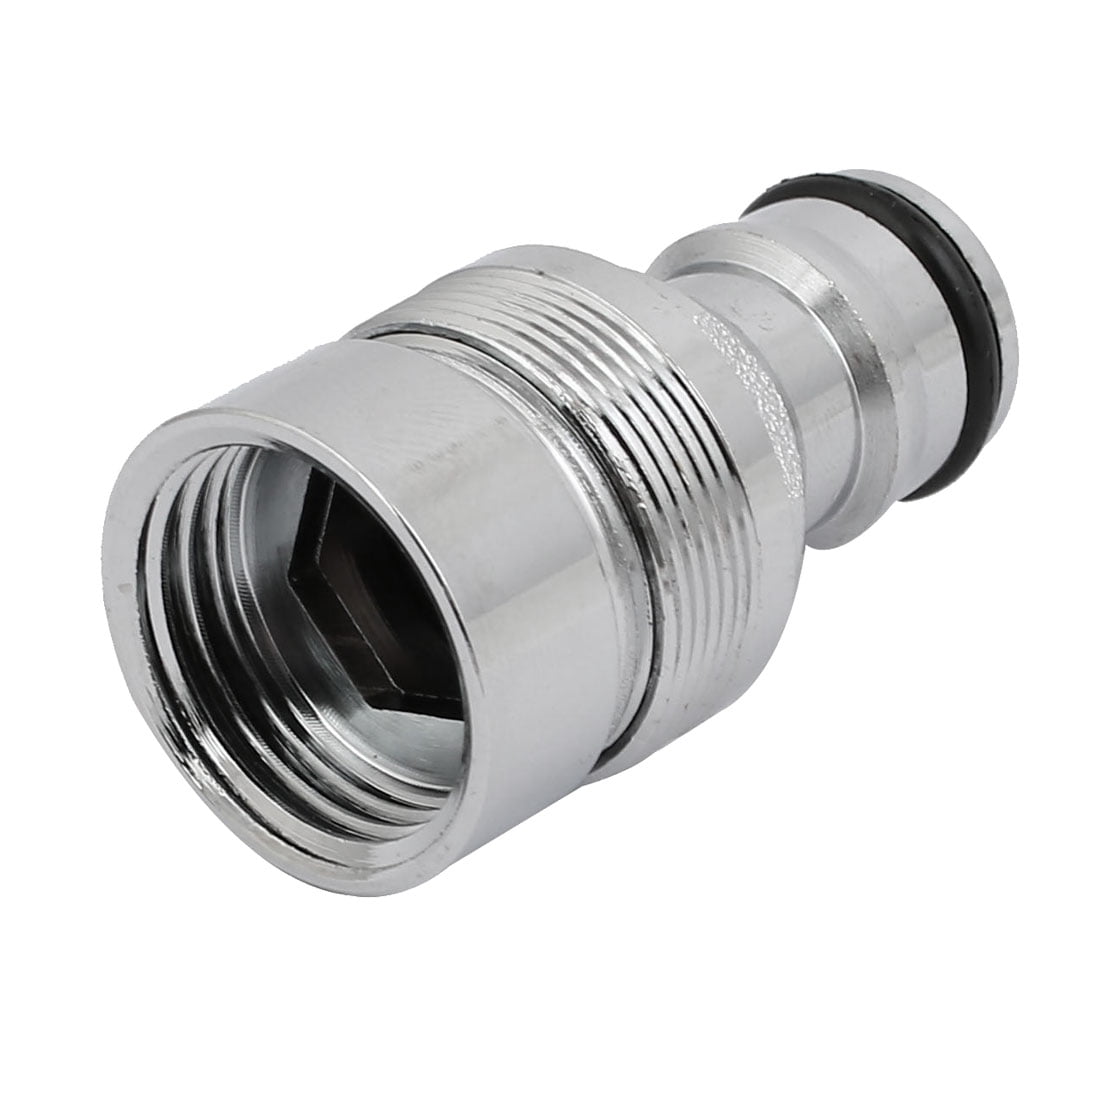 1/2BSP Female Threaded Removable Water Hose Quick Connector Faucet Tap Adapter 